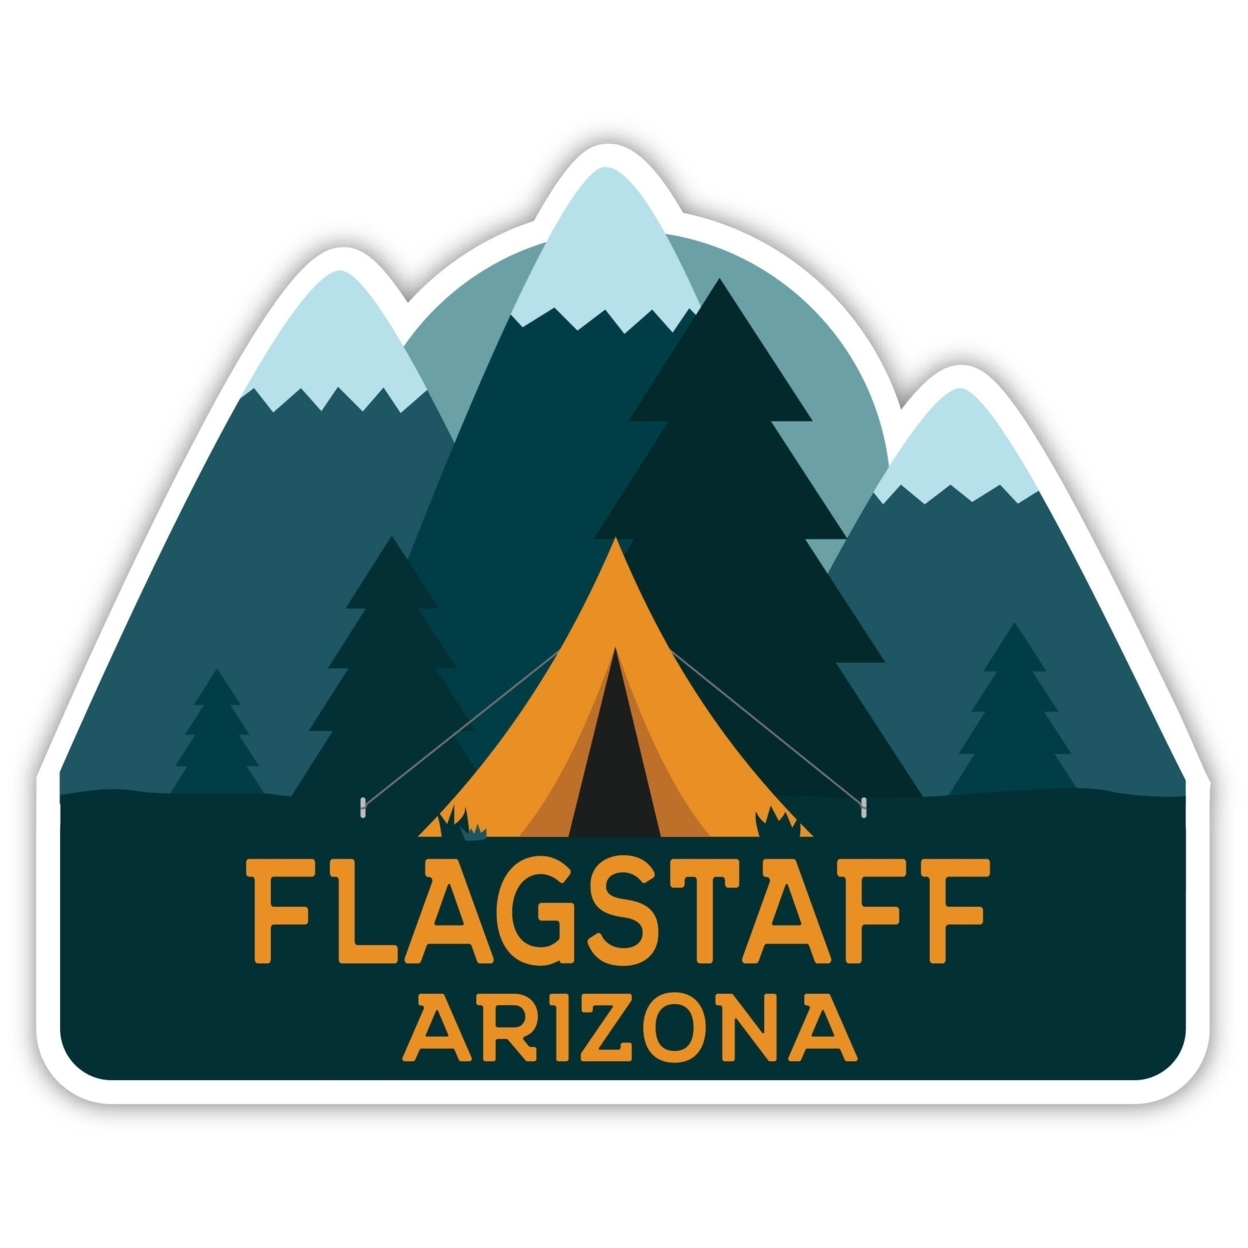 Flagstaff Arizona Souvenir Decorative Stickers (Choose Theme And Size) - 4-Pack, 2-Inch, Tent